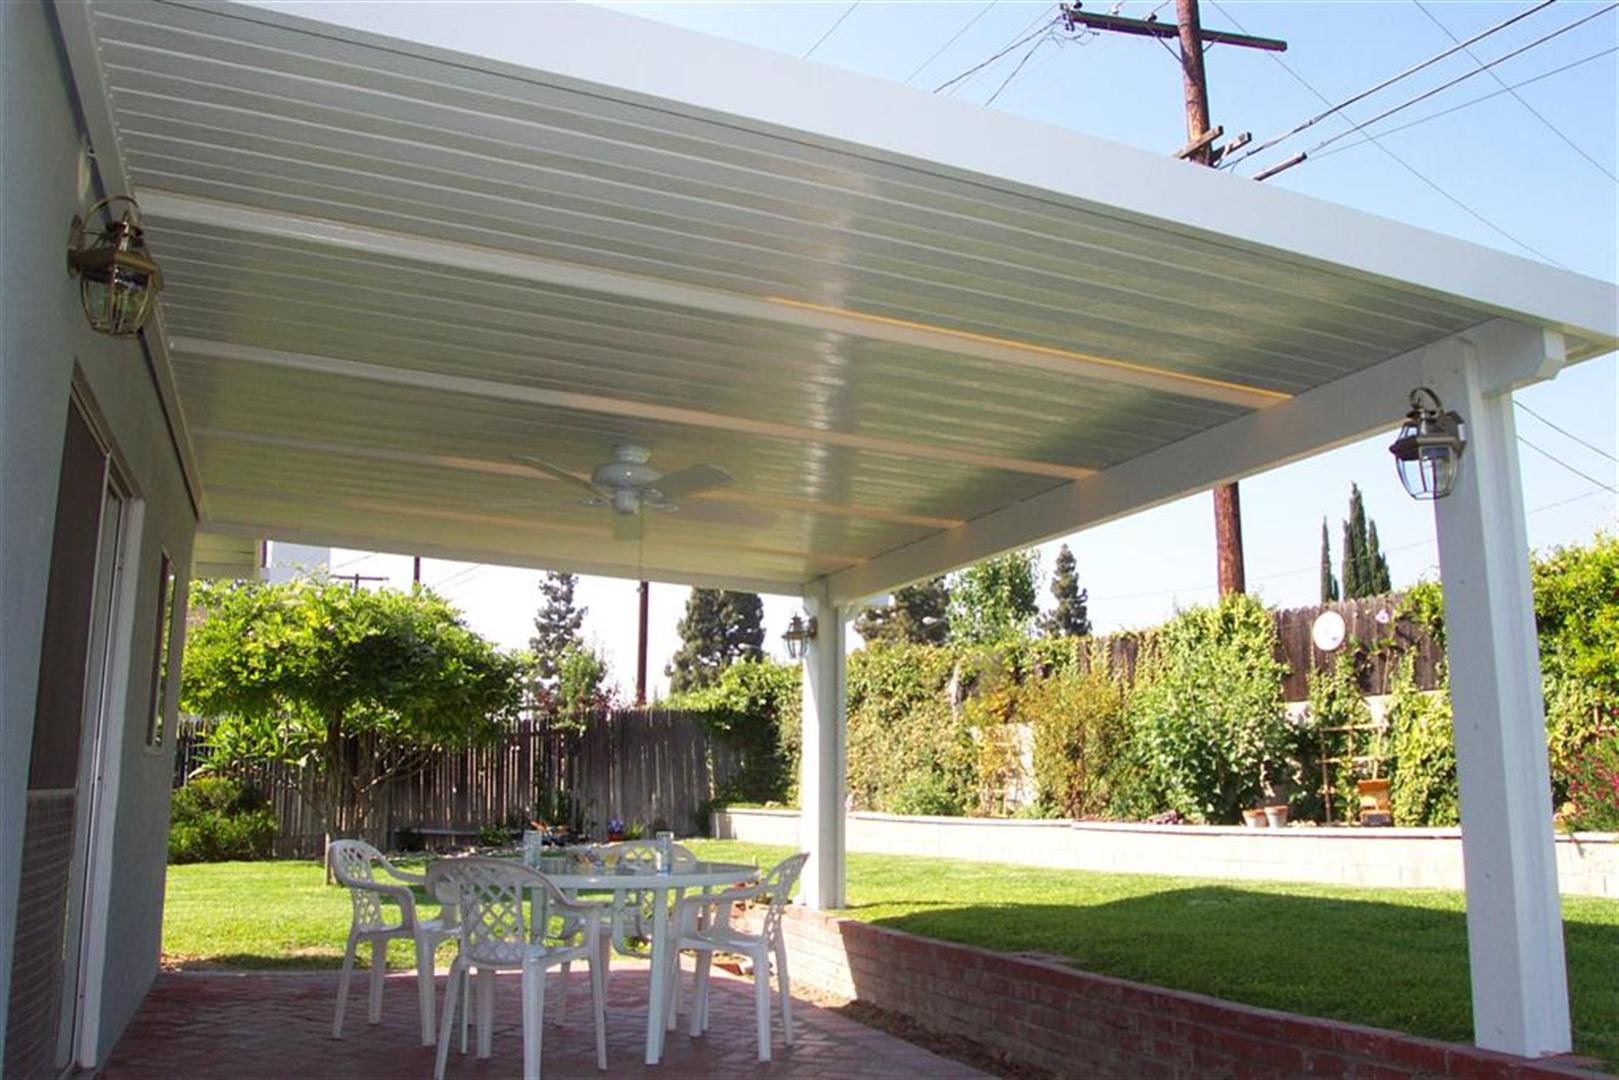 large patio covers acvap homes ideas for grills home elements and style